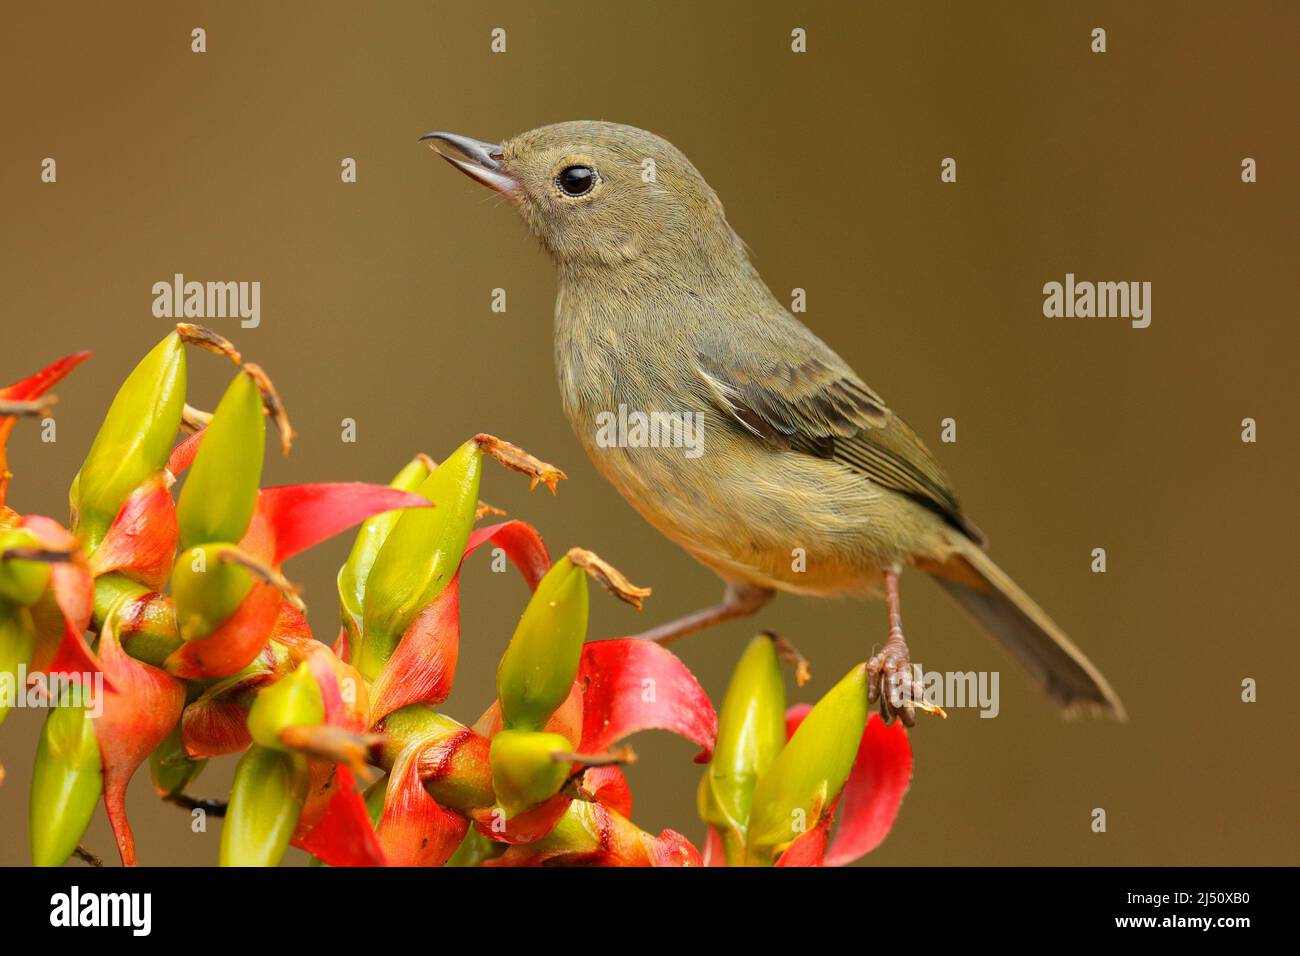 Glossy Flowerpiercer, Diglossa lafresnayii, female, black bird with bent bill sitting on the orange red flower, nature habitat, exotic animal from Col Stock Photo